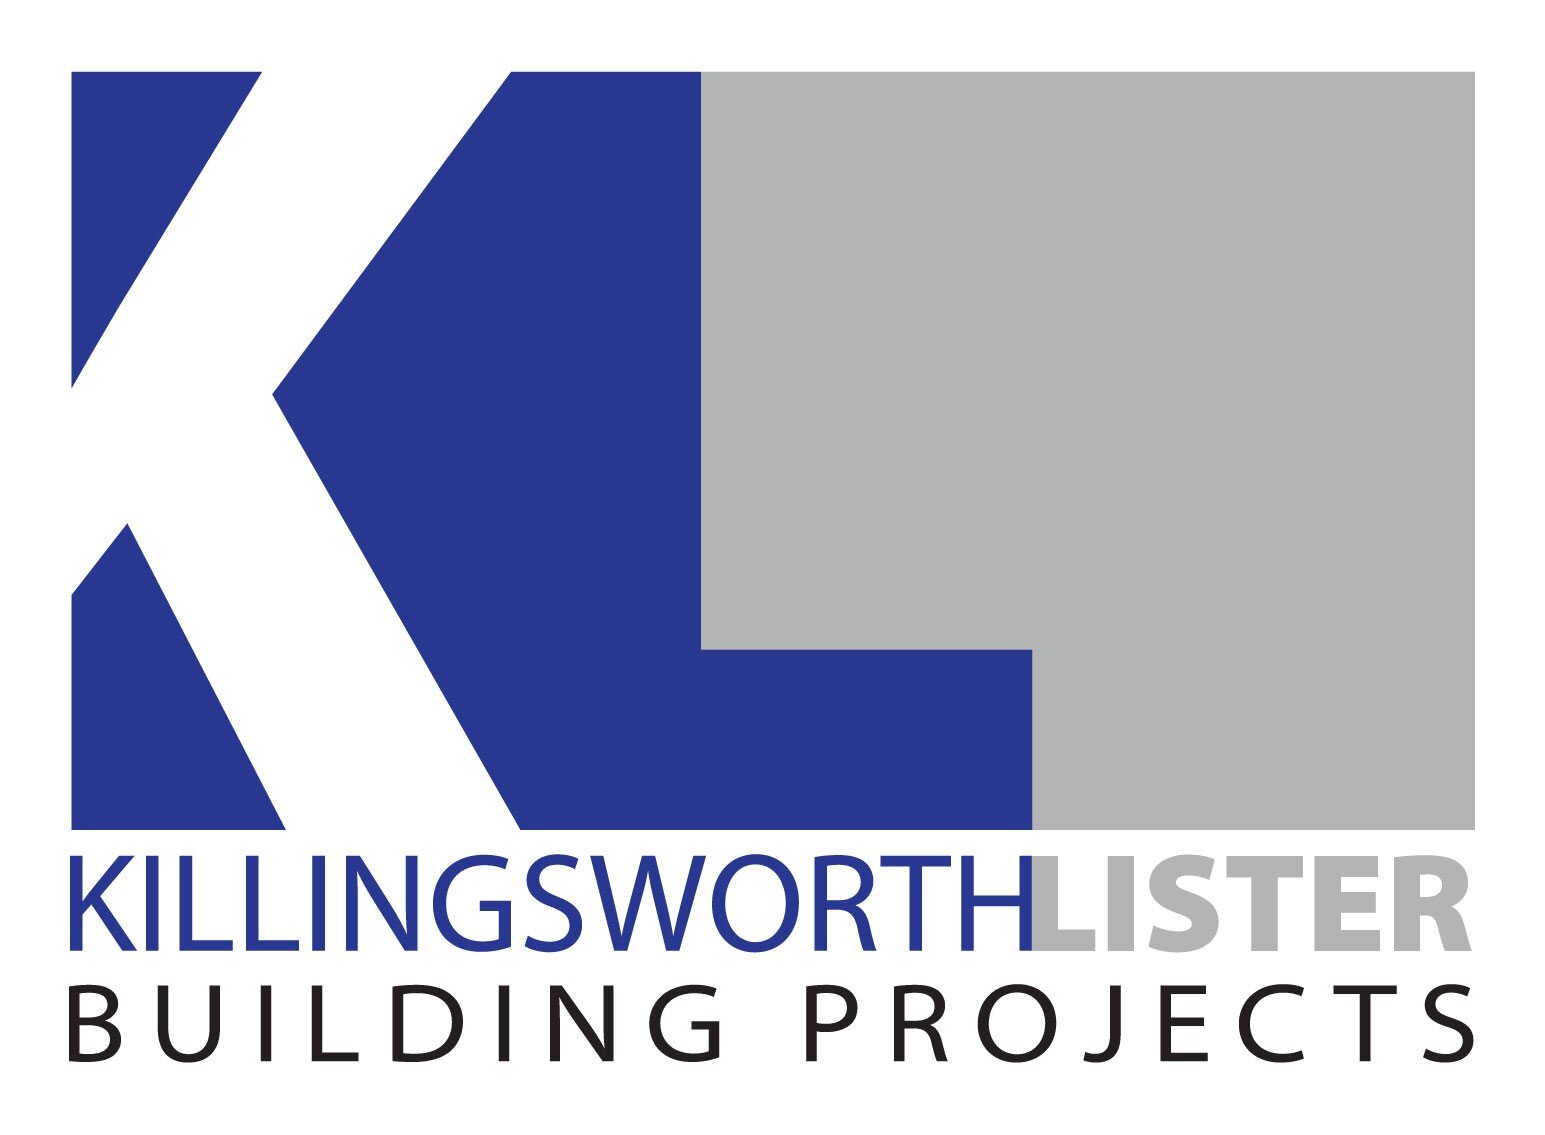 KL Building Projects